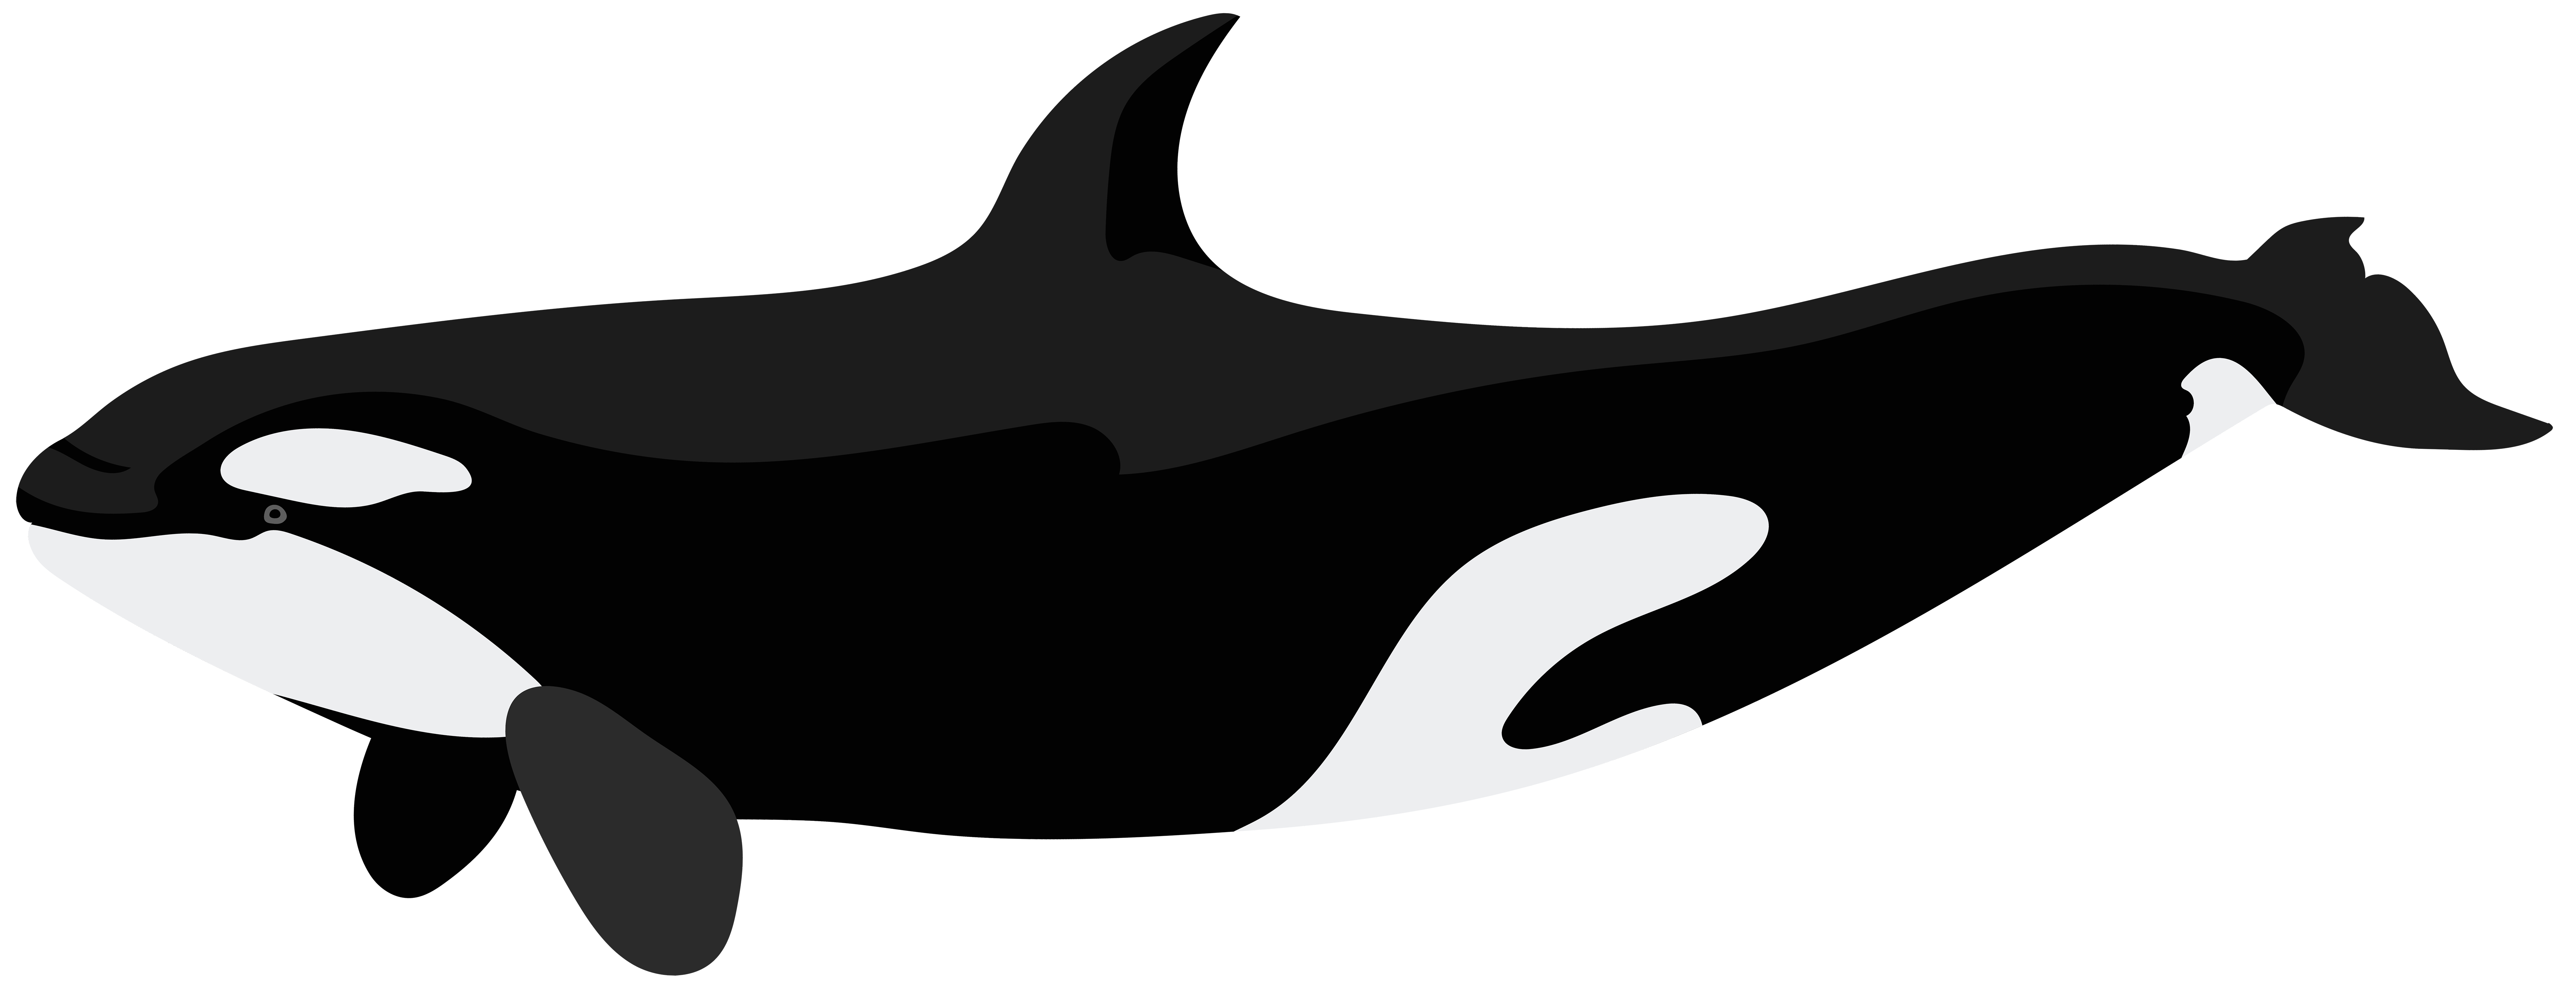 Orcas Clip Art Free Clipart Images 5 Wikiclipart - Riset